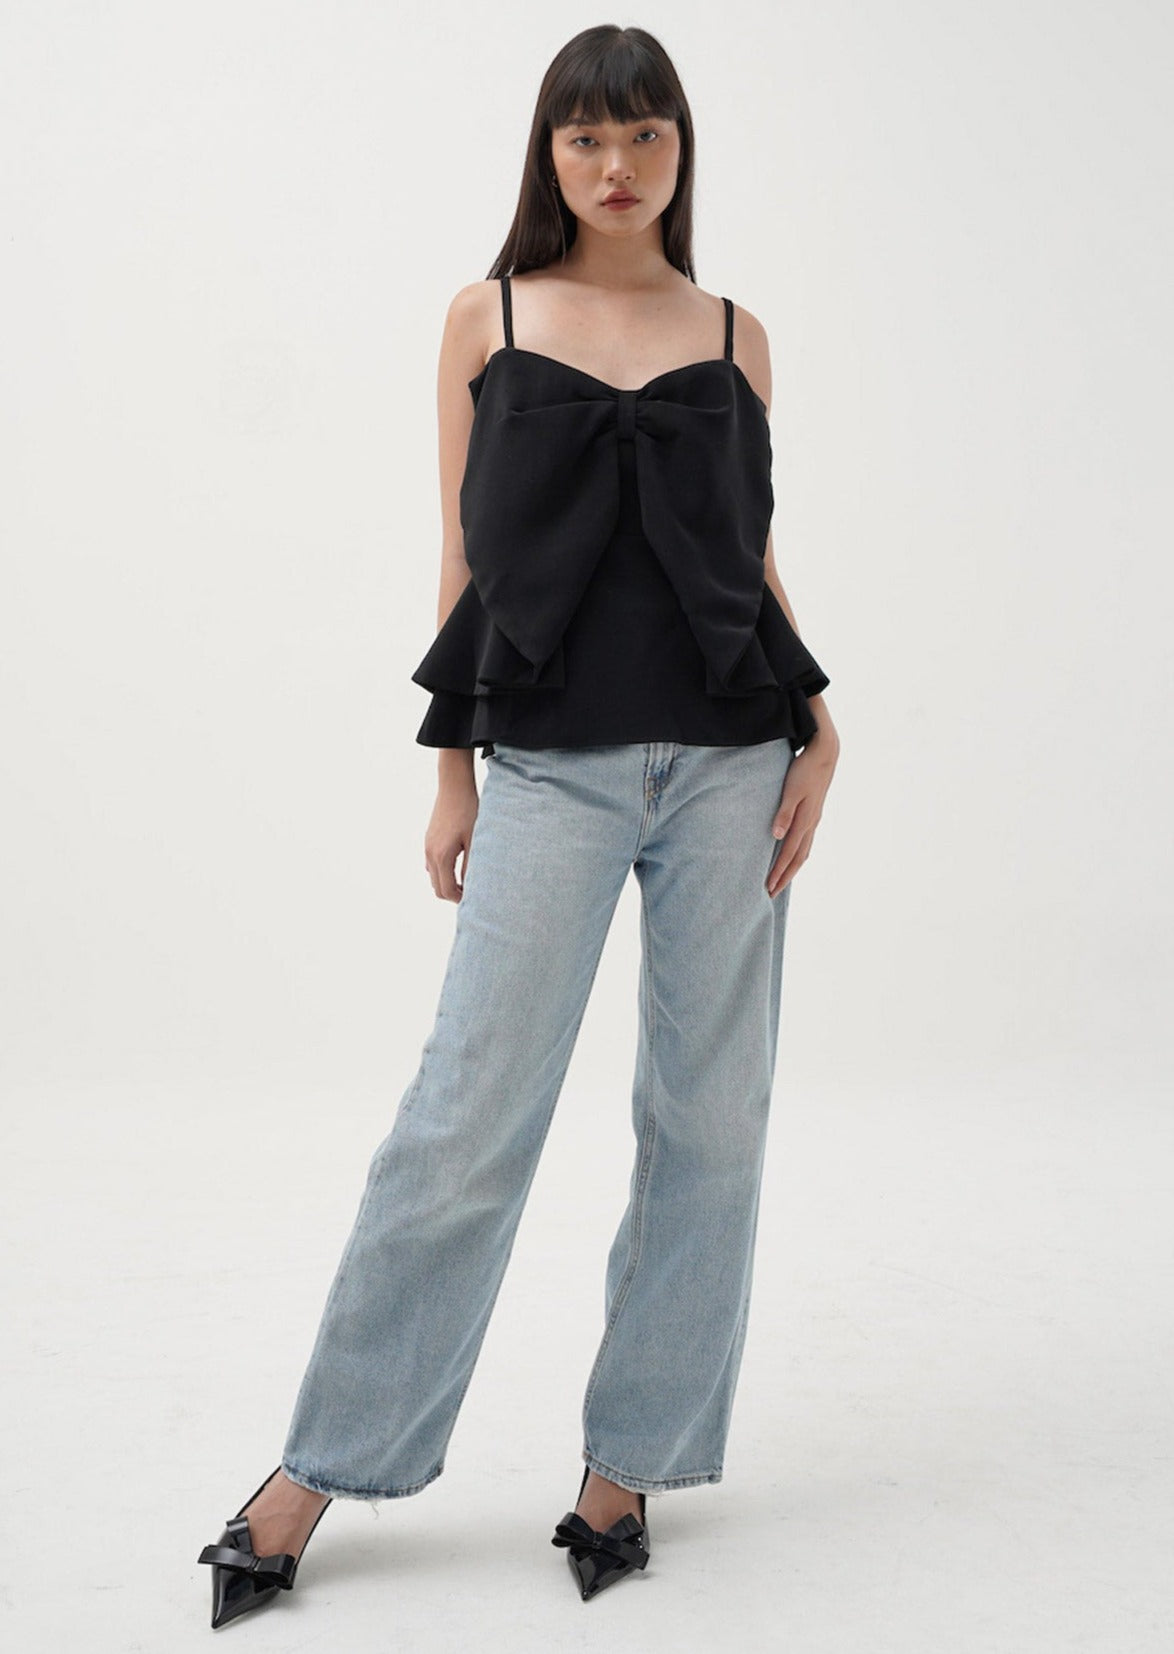 Eclette Bow Top In Black